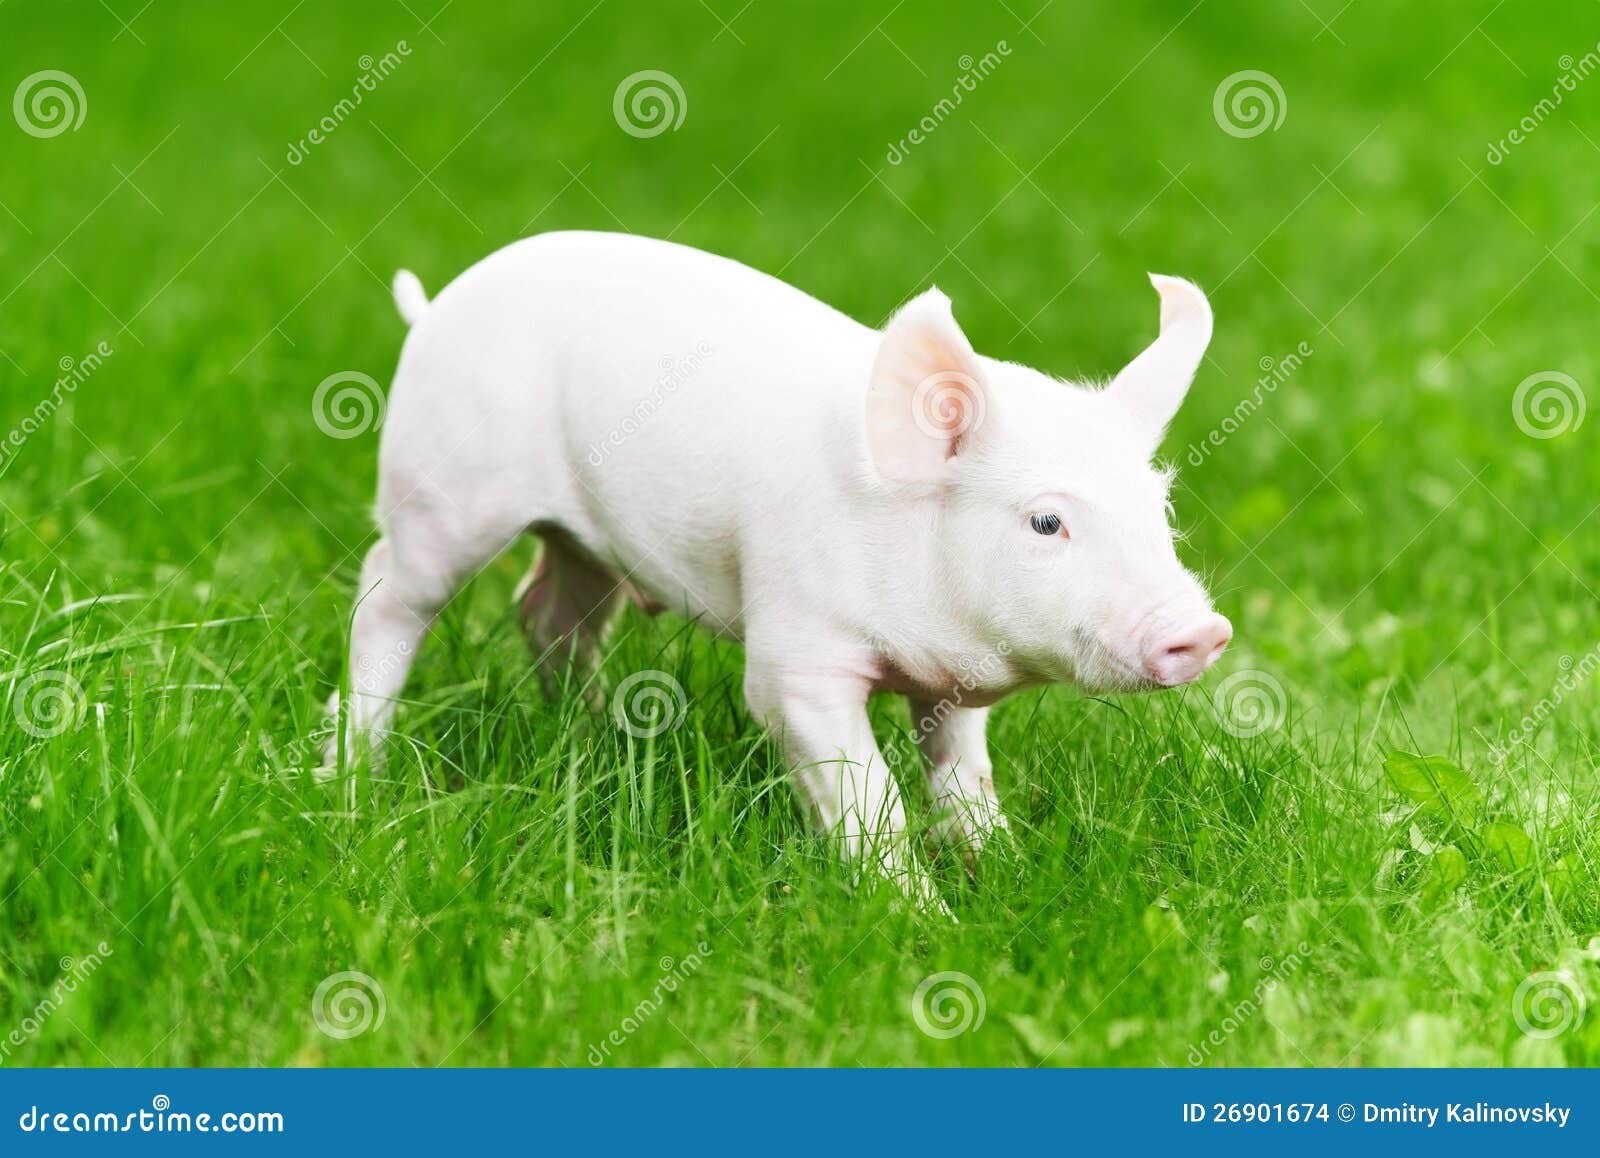 young piglet on green grass